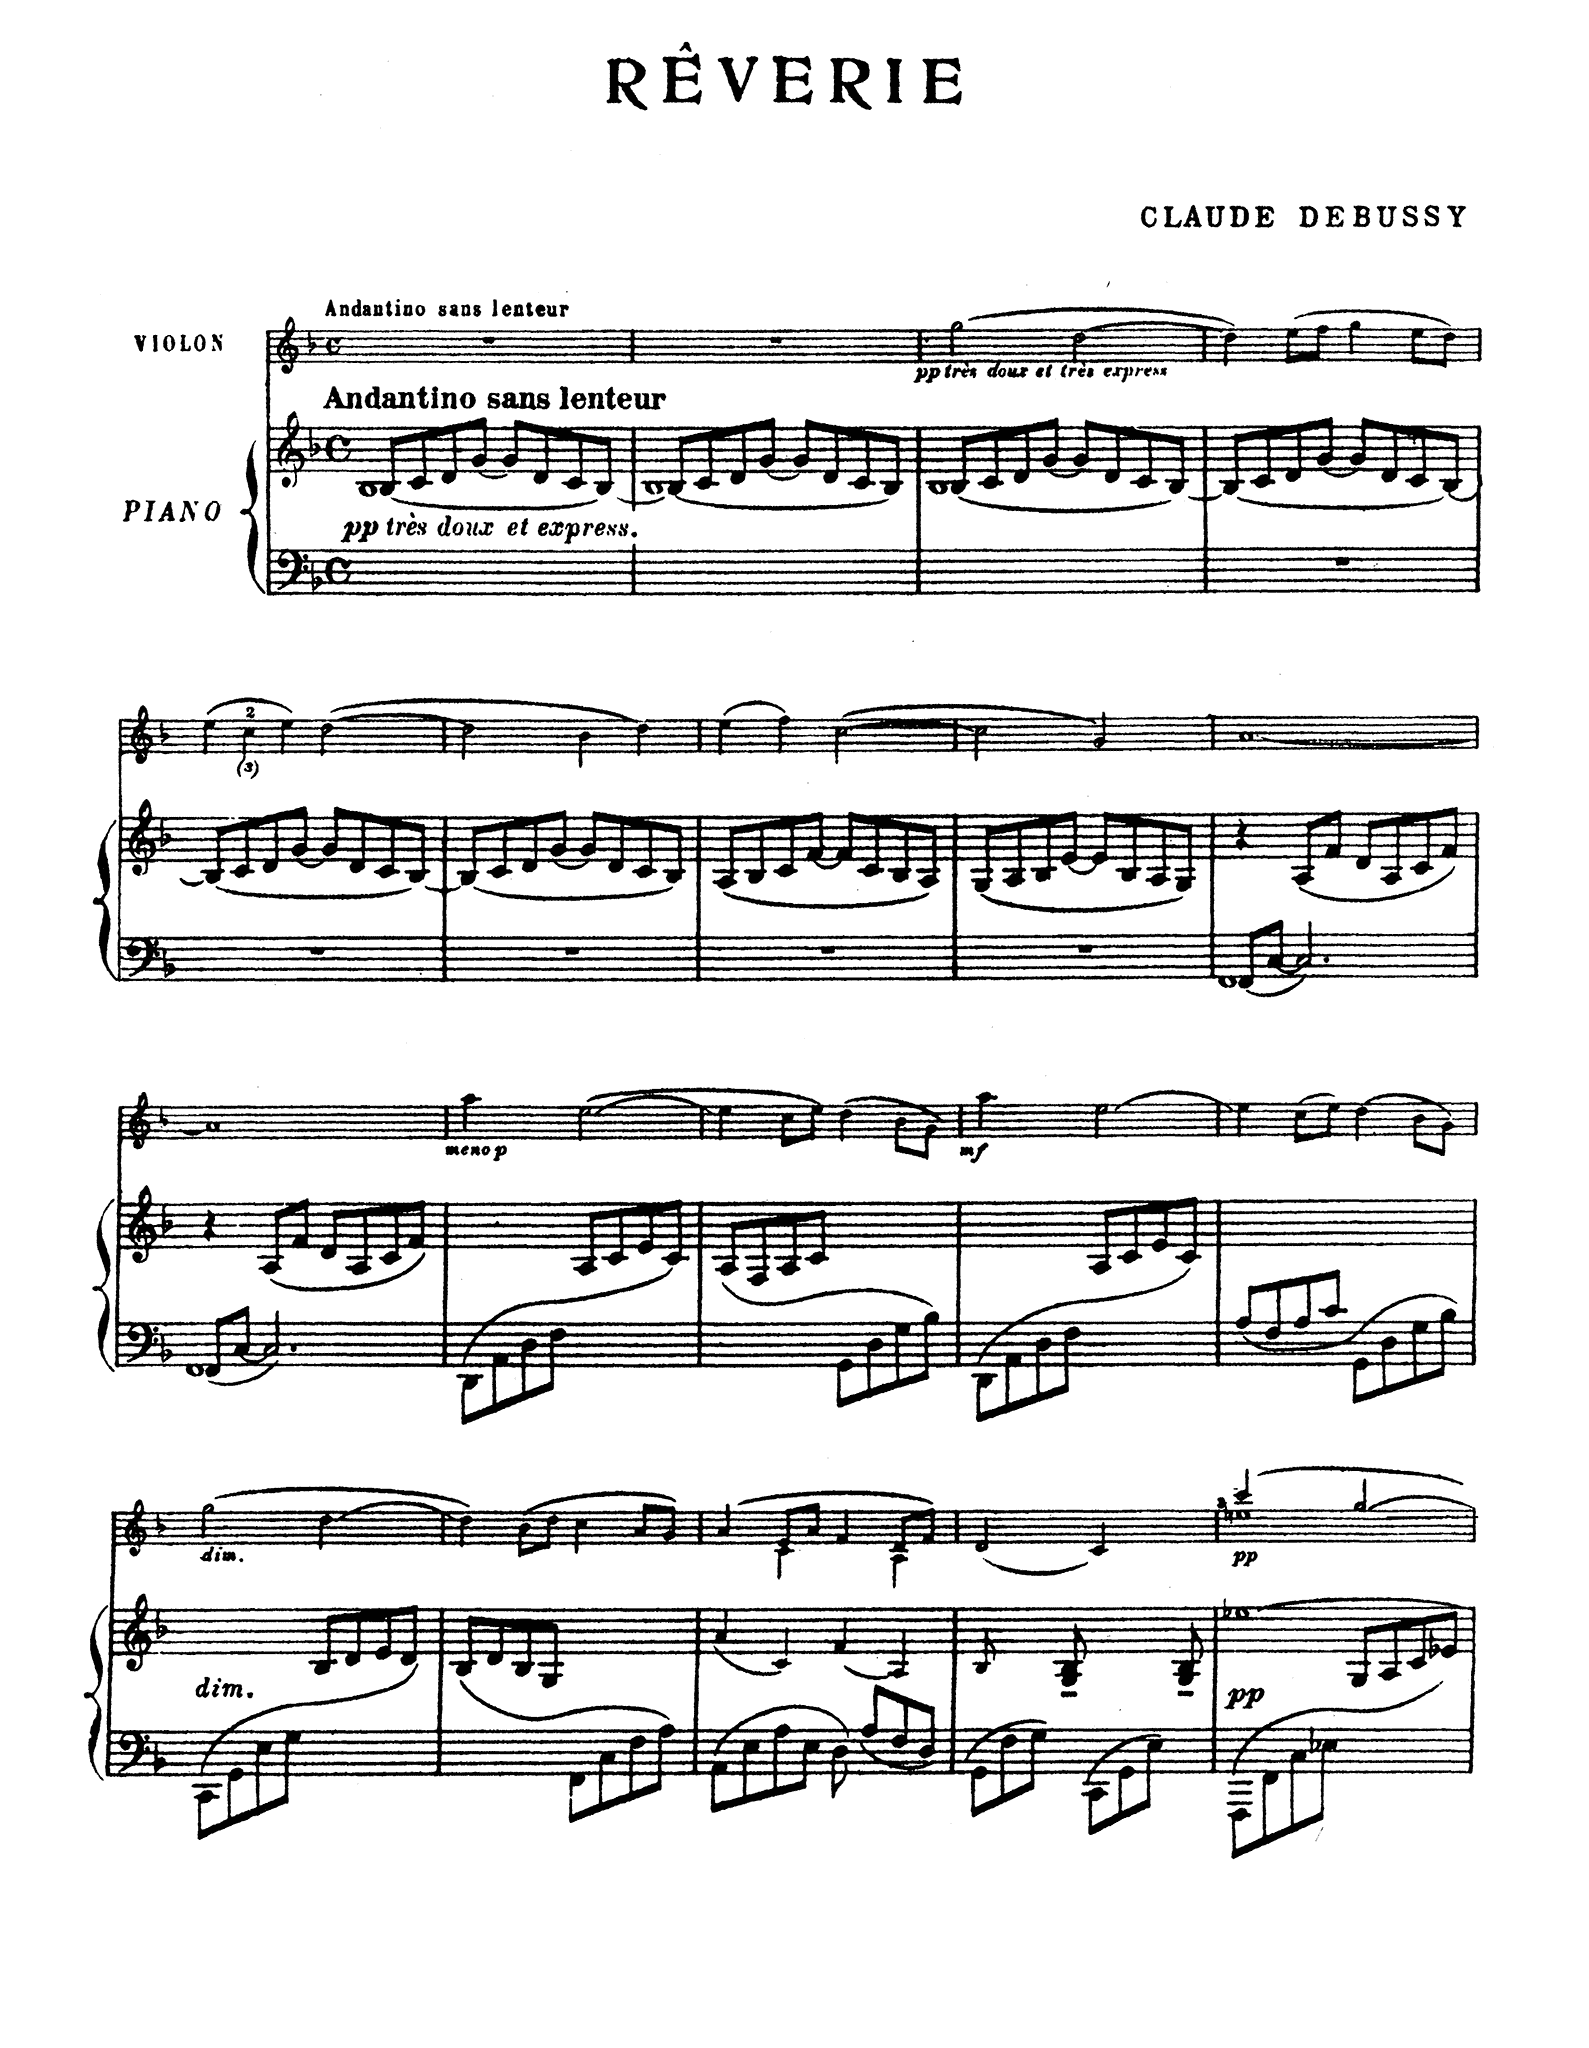 Debussy Rêverie clarinet and piano arrangement score